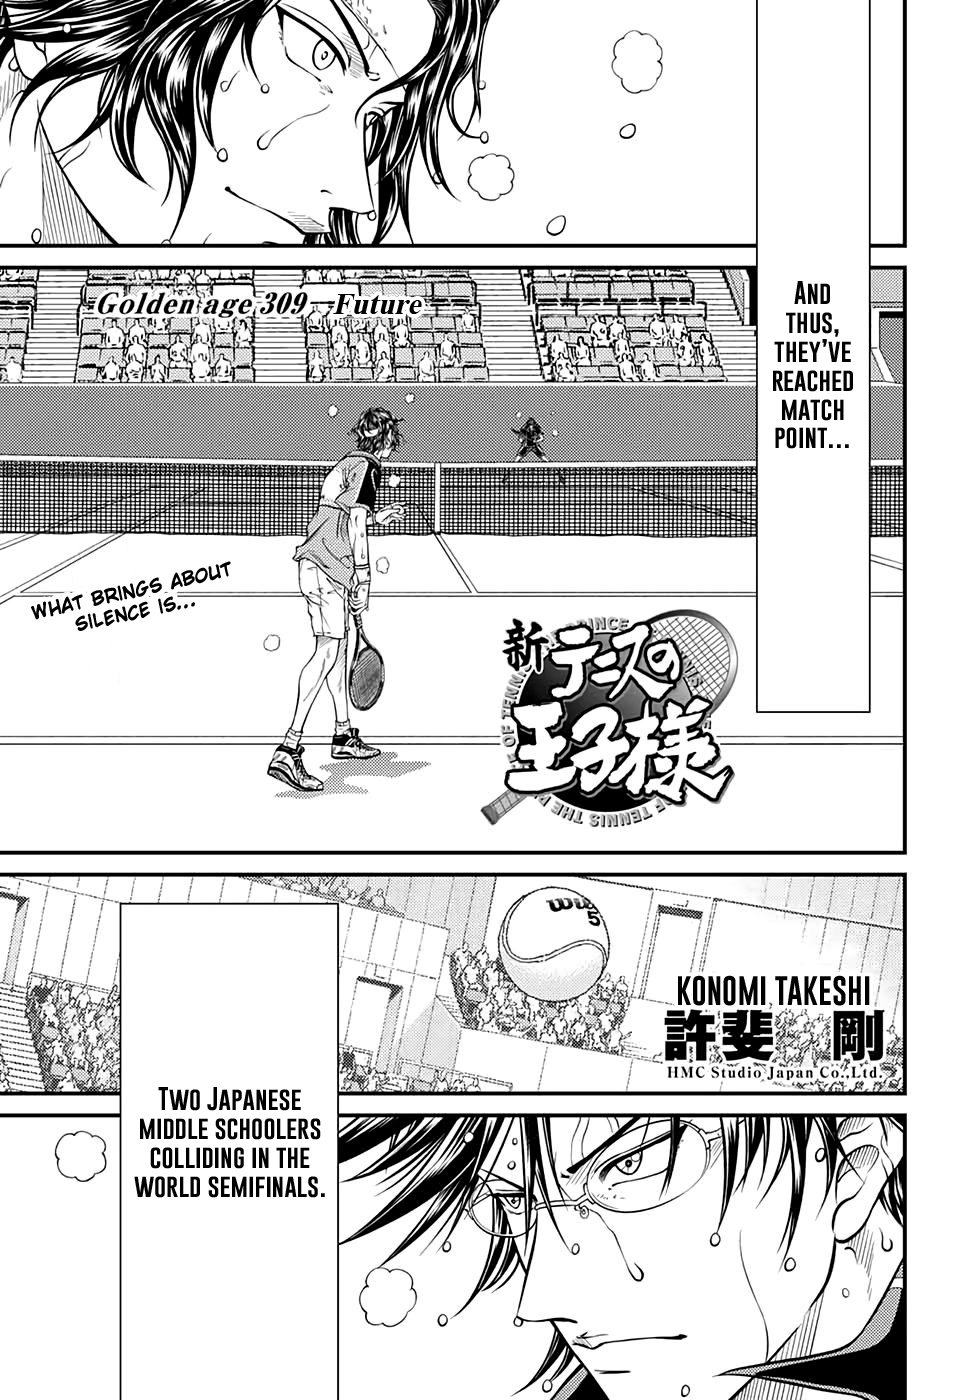 New Prince Of Tennis Chapter 309: Golden Age 309 Future - Picture 1